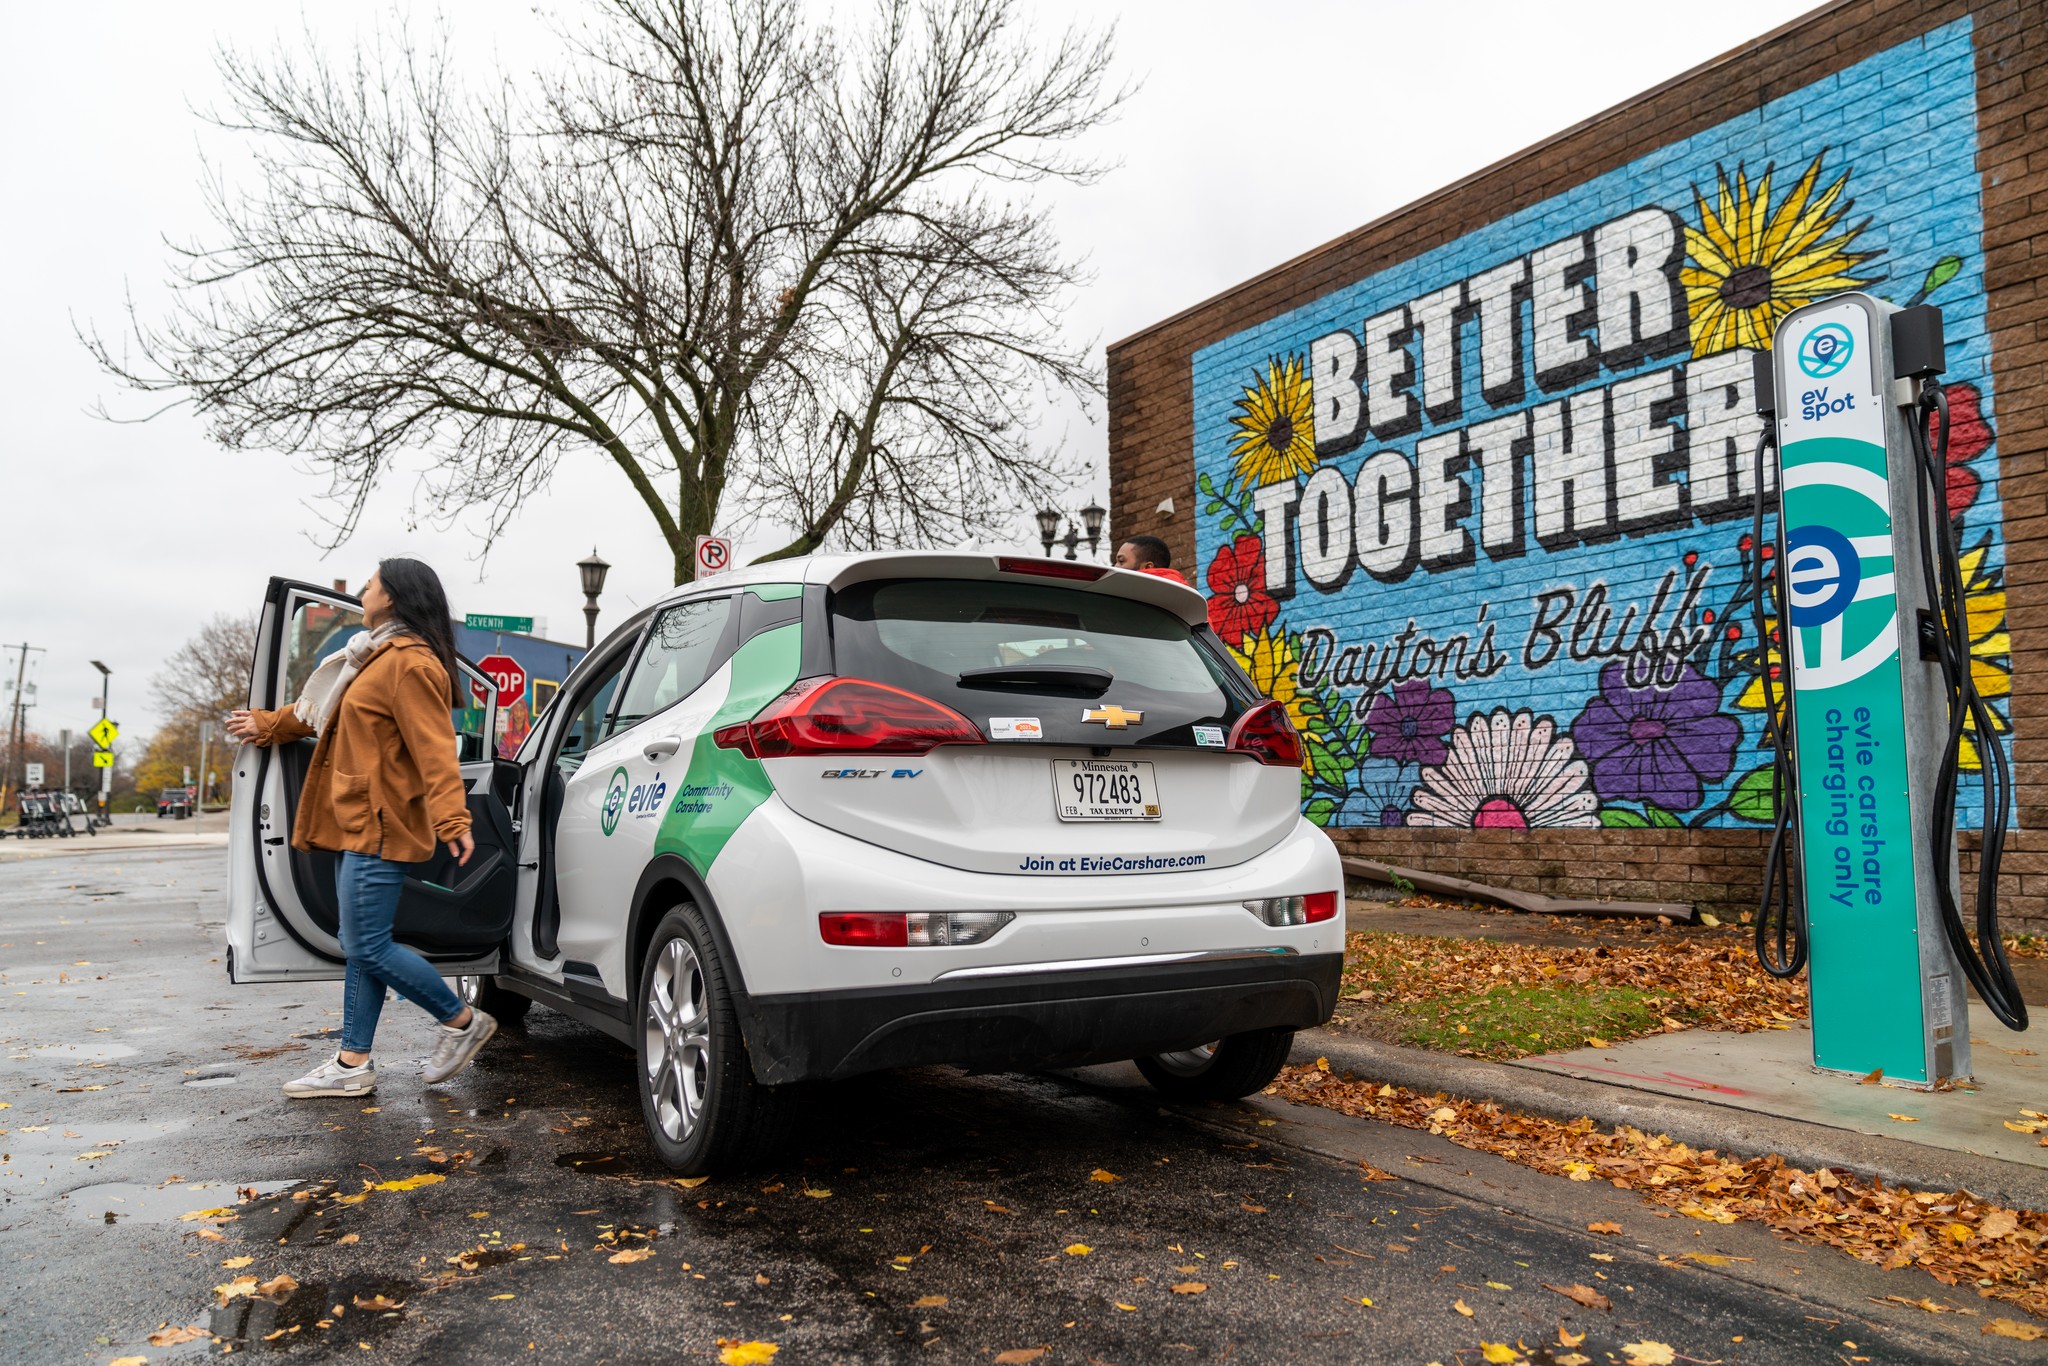 Evie Electric Car Sharing And EV Charging Network Have Rolled Out In The Twin Cities . Credit HOURCAR